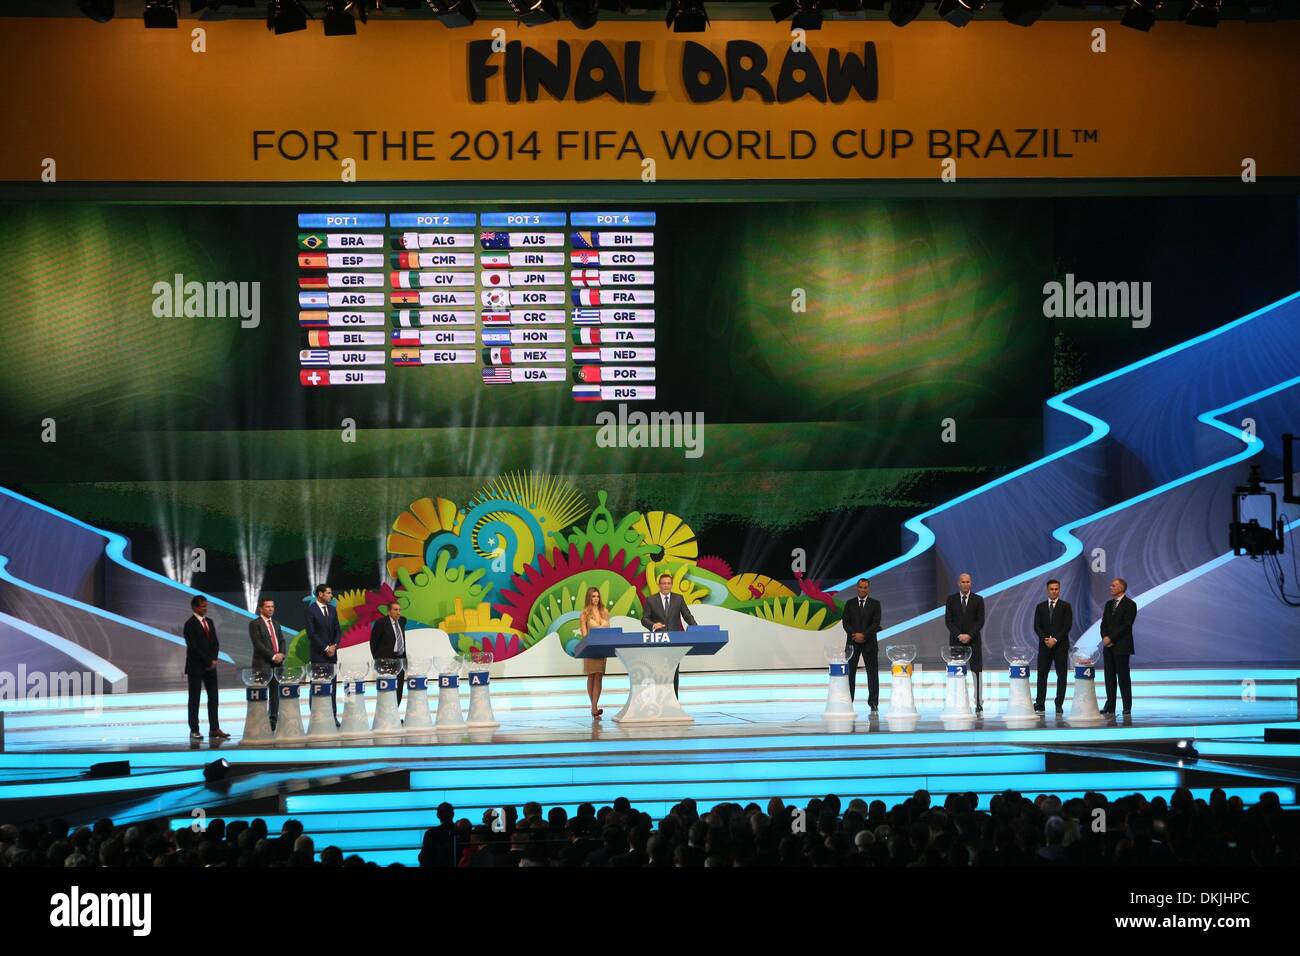 COSTA DO SAUIPE, Brazil. 6th Dec, 2013.  shows the scene of the FIFA final draw at Sauipe Park in Costa do Sauipe, Bahia, Brazil. The final draw of 2014 FIFA World Cup was held here Friday. Credit:  Xinhua/Alamy Live News Stock Photo